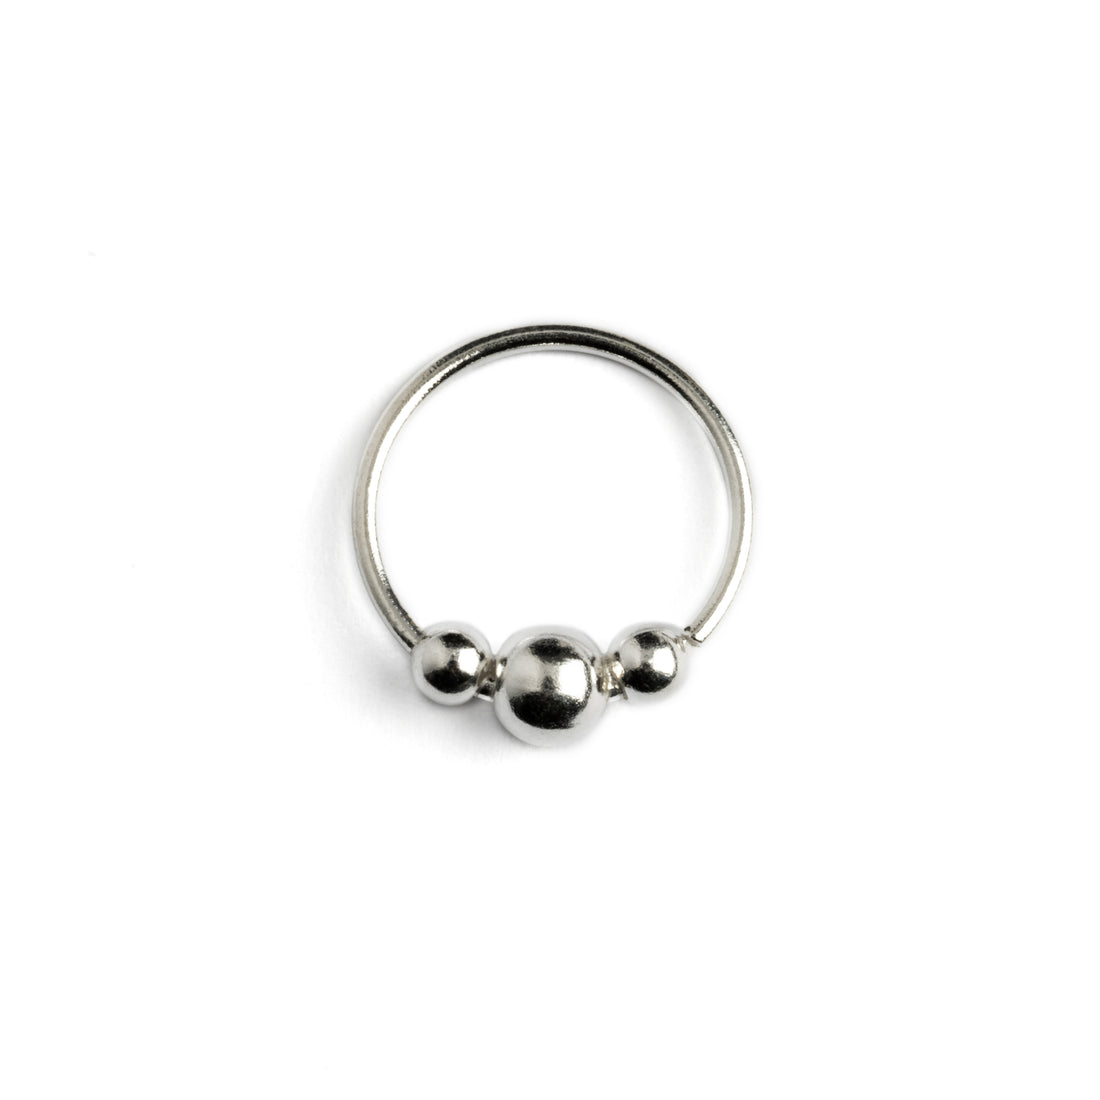 Silver beads nose ring frontal view